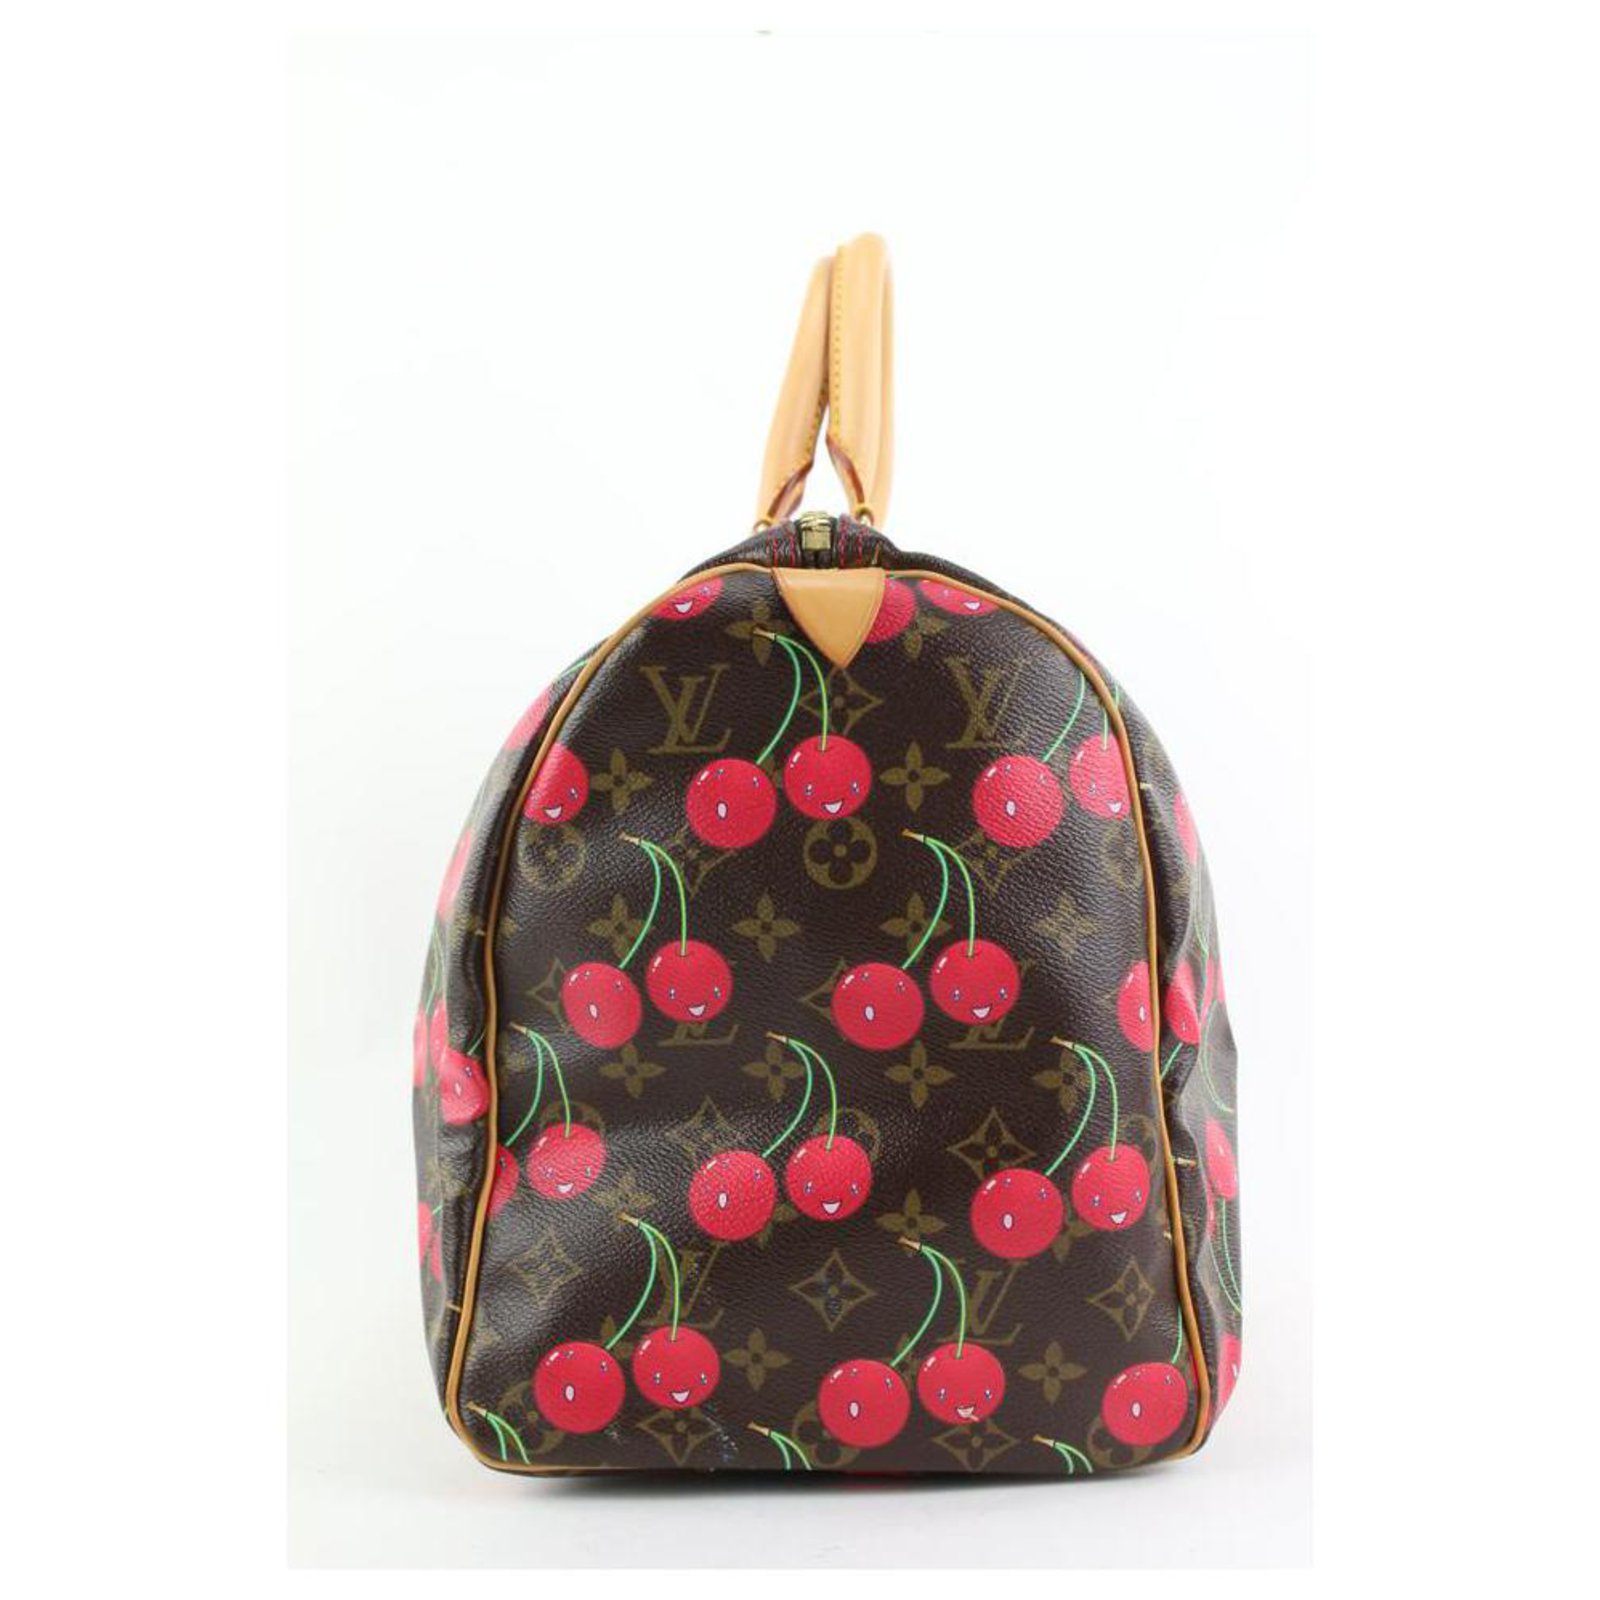 Louis Vuitton Cerises Cherries Keepall 45 Travel Bag For Sale at